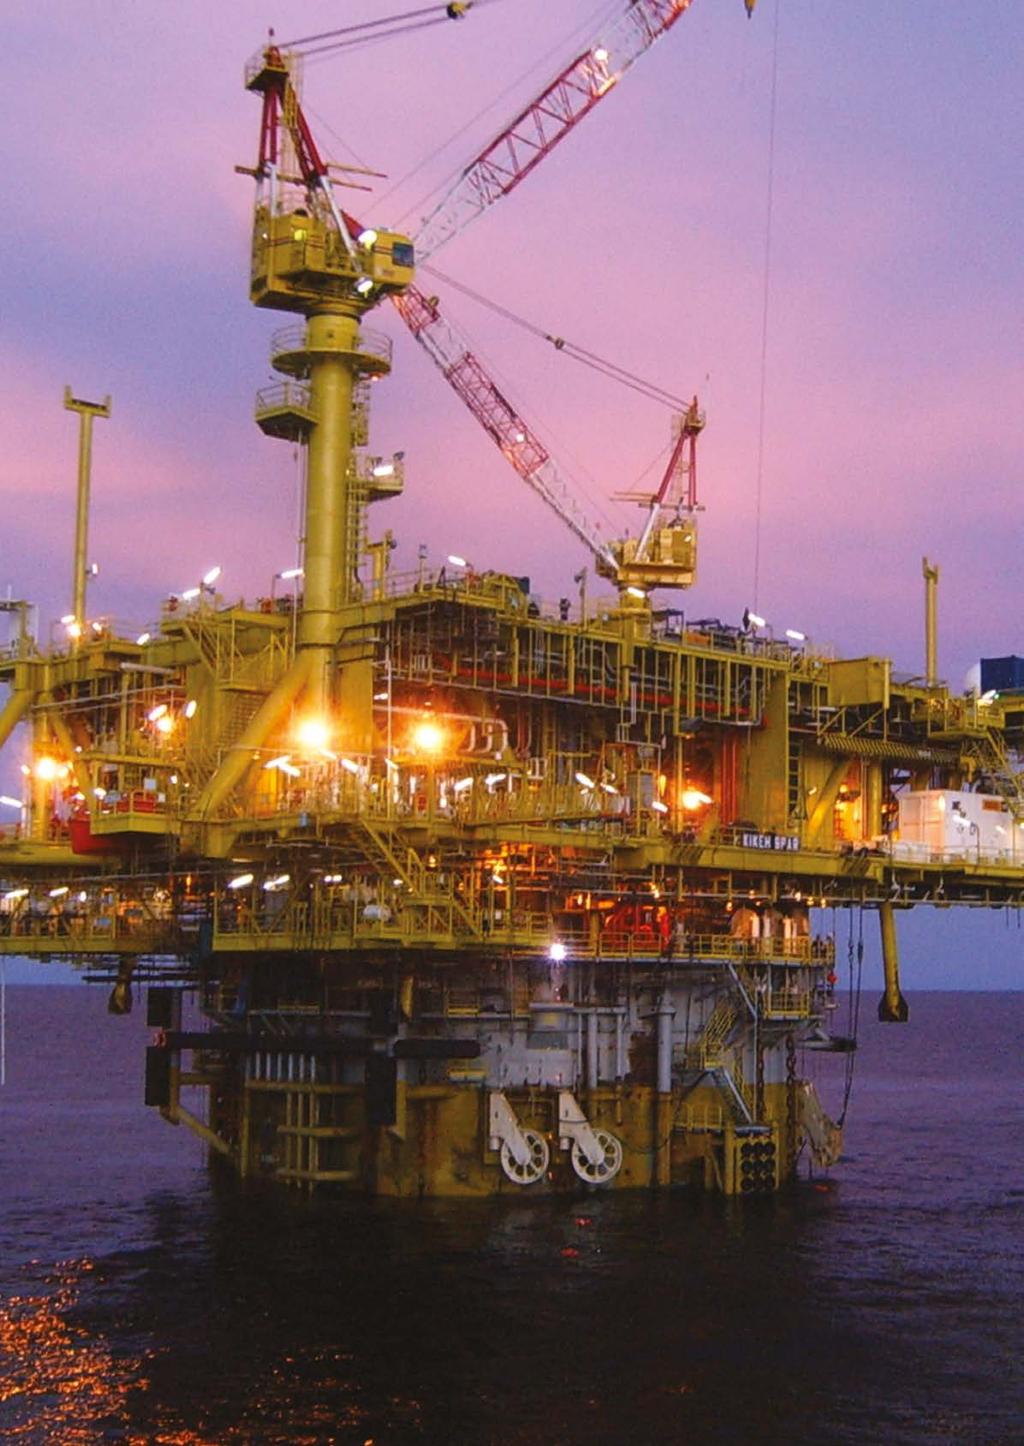 Key benefits TechnipFMC offers its clients Outstanding environmental, health, and safety performance Global presence and expertise in project execution across the oil and gas, petrochemicals, and